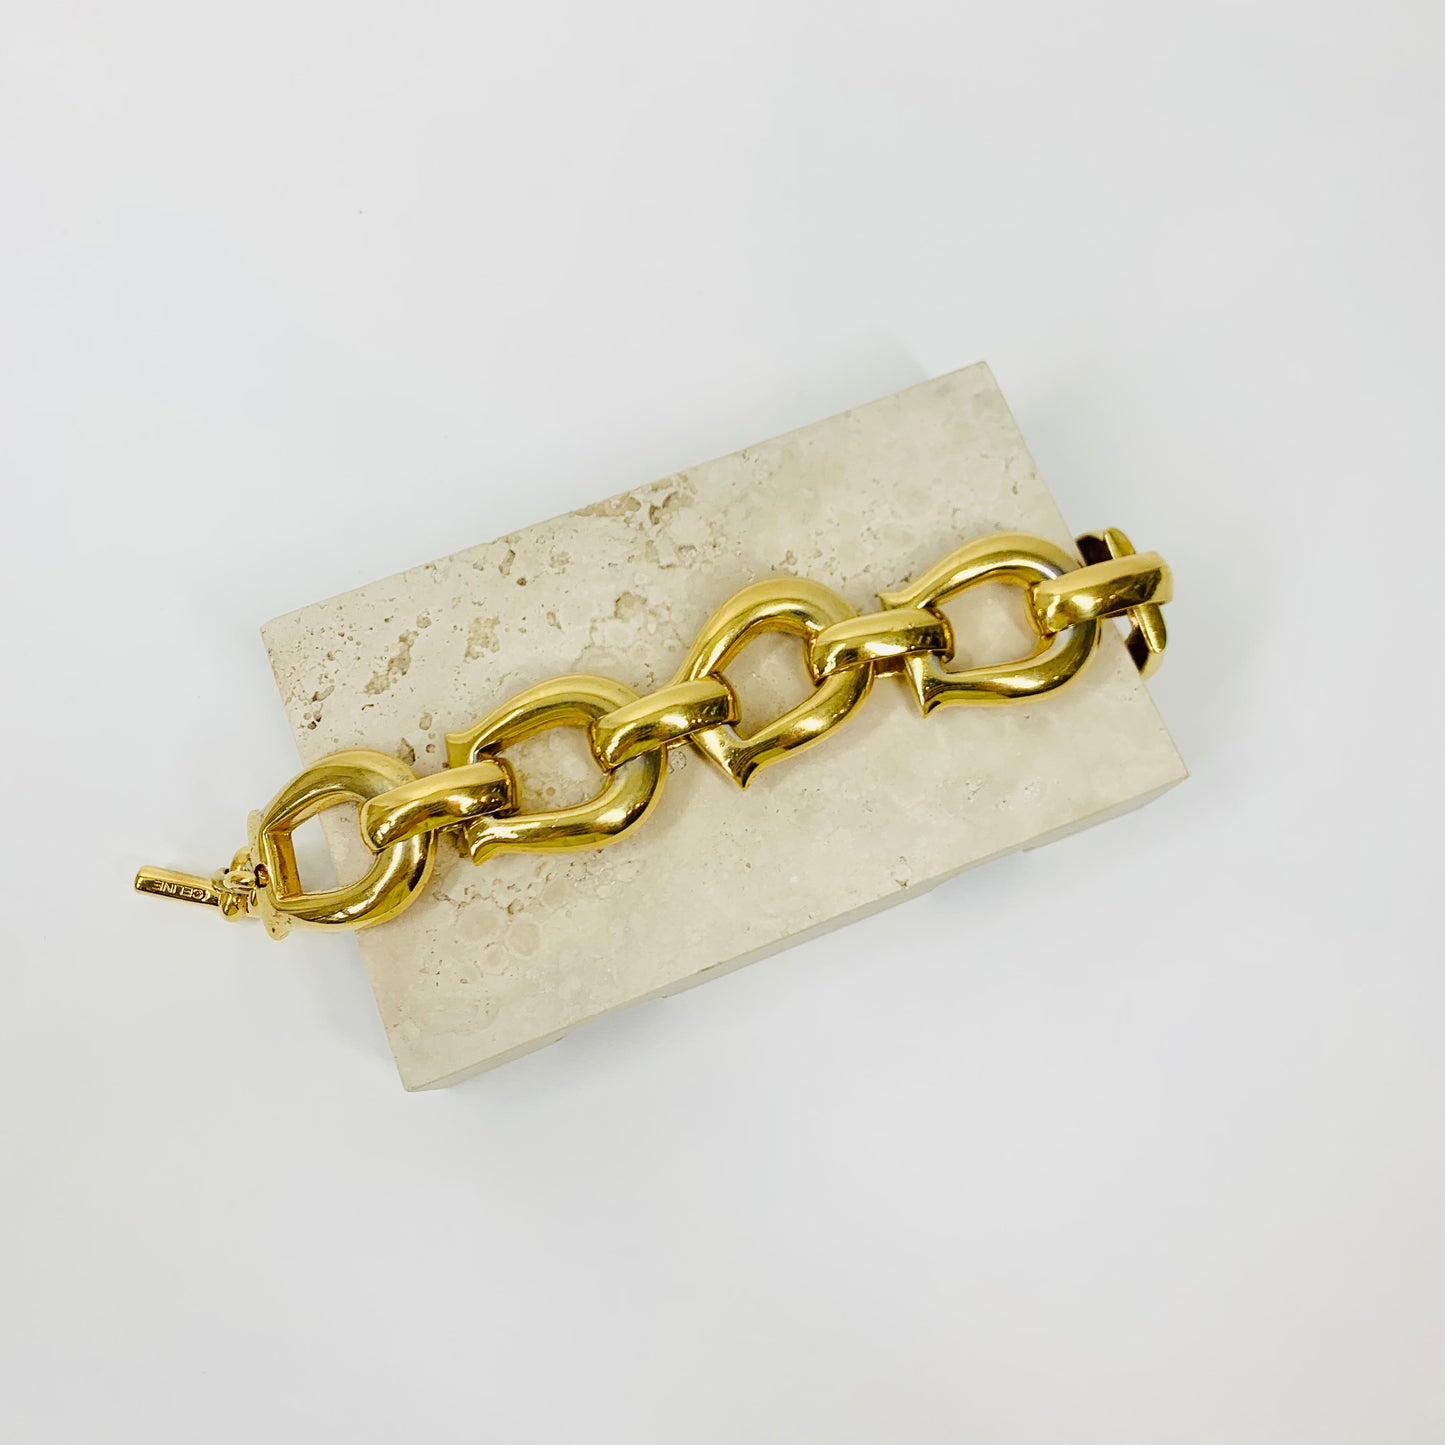 Rare 80s gold plated Celine chunky fancy links with fob clasp bracelet